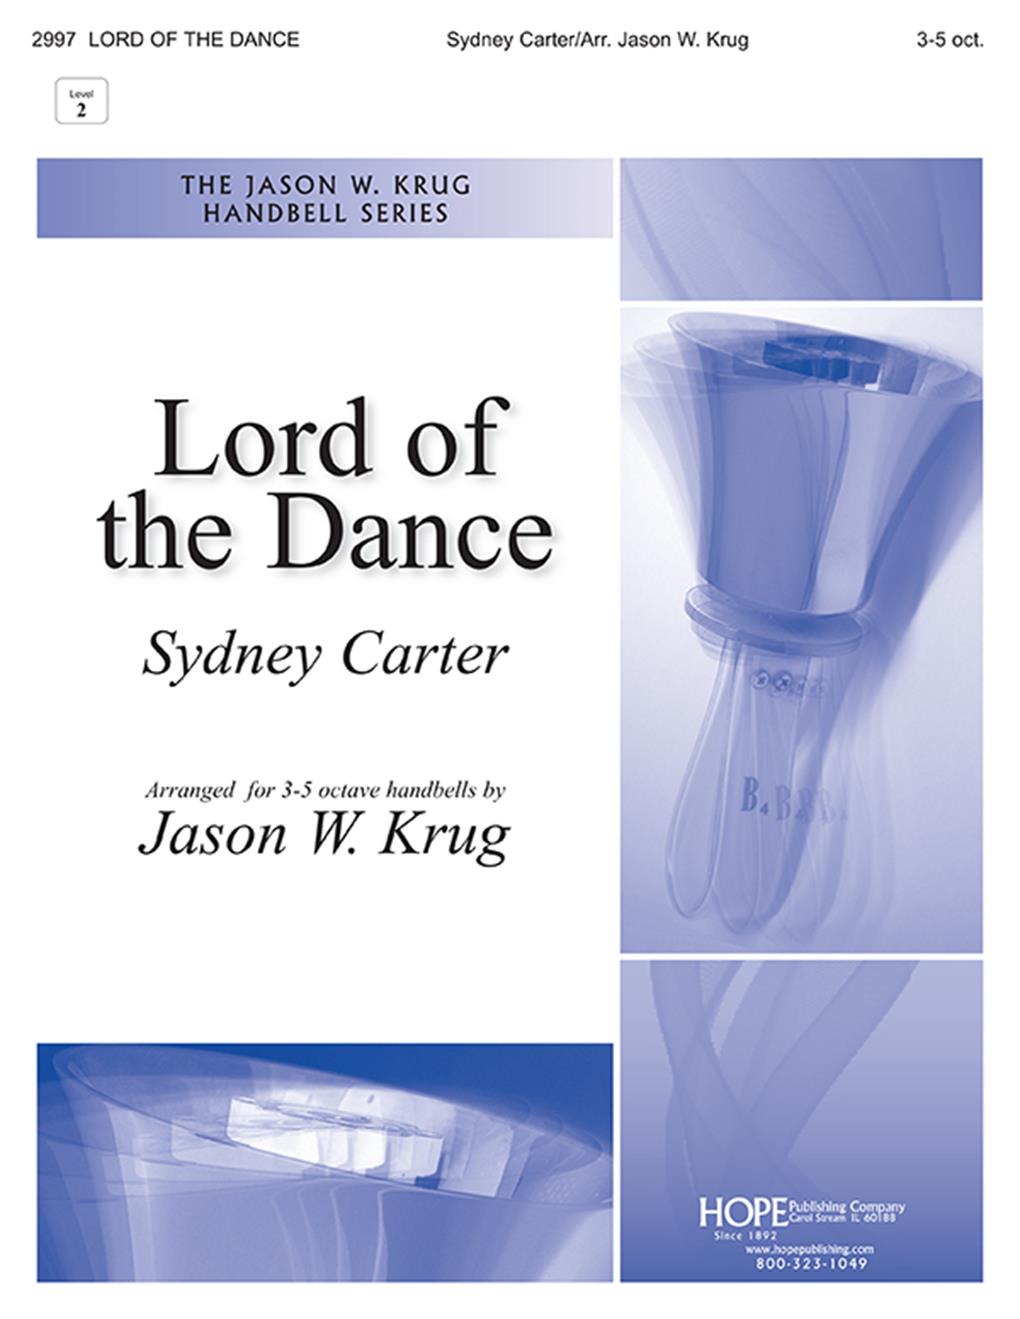 Lord of the Dance - 3-5 Oct. Cover Image